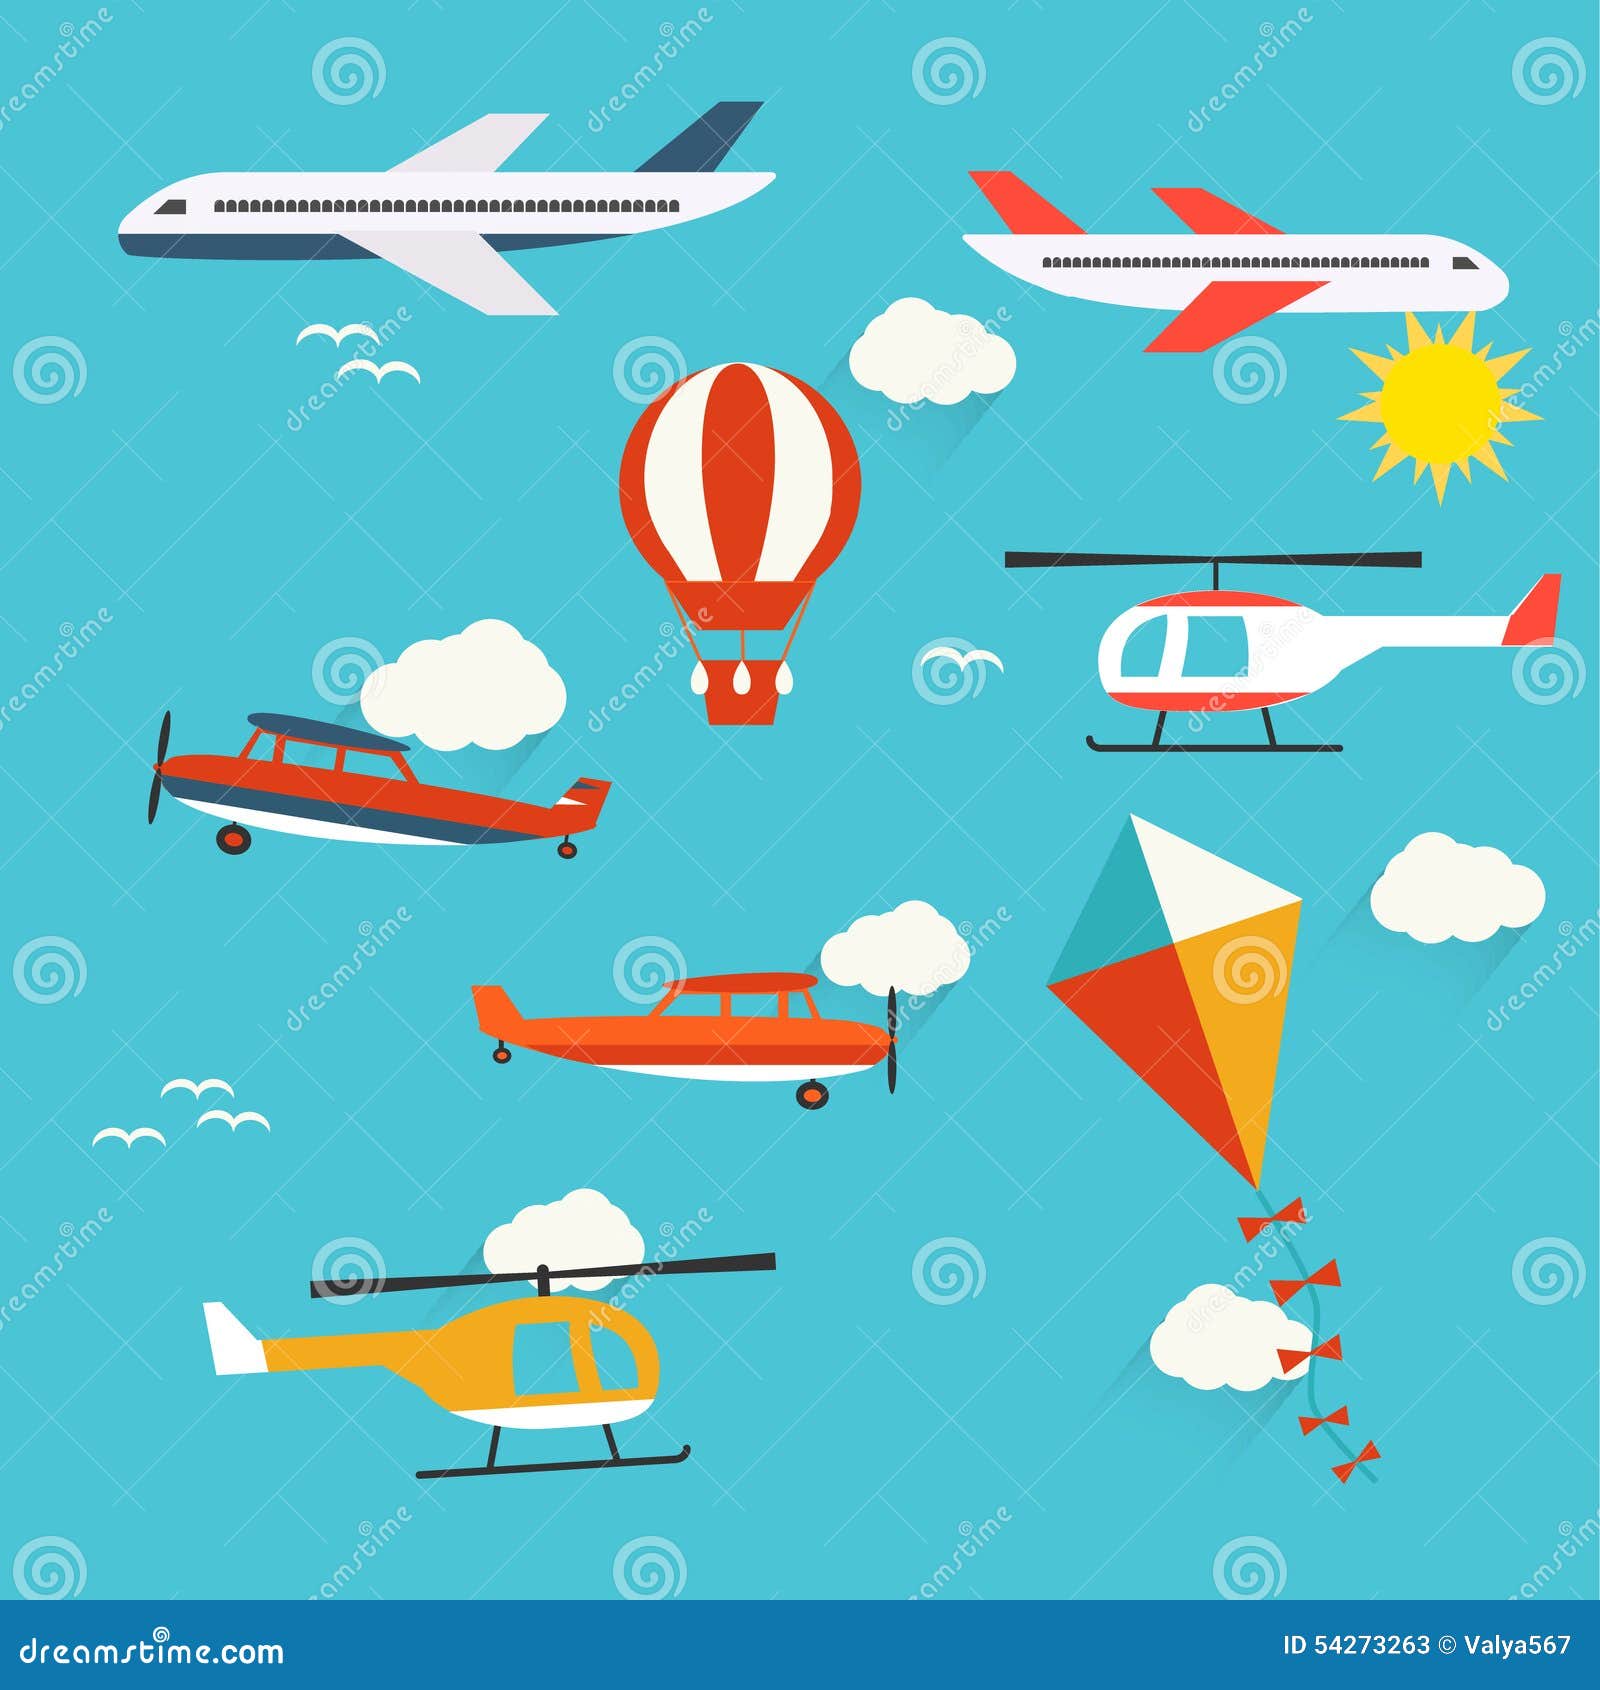 planes, helicopters, hot air balloon and kite